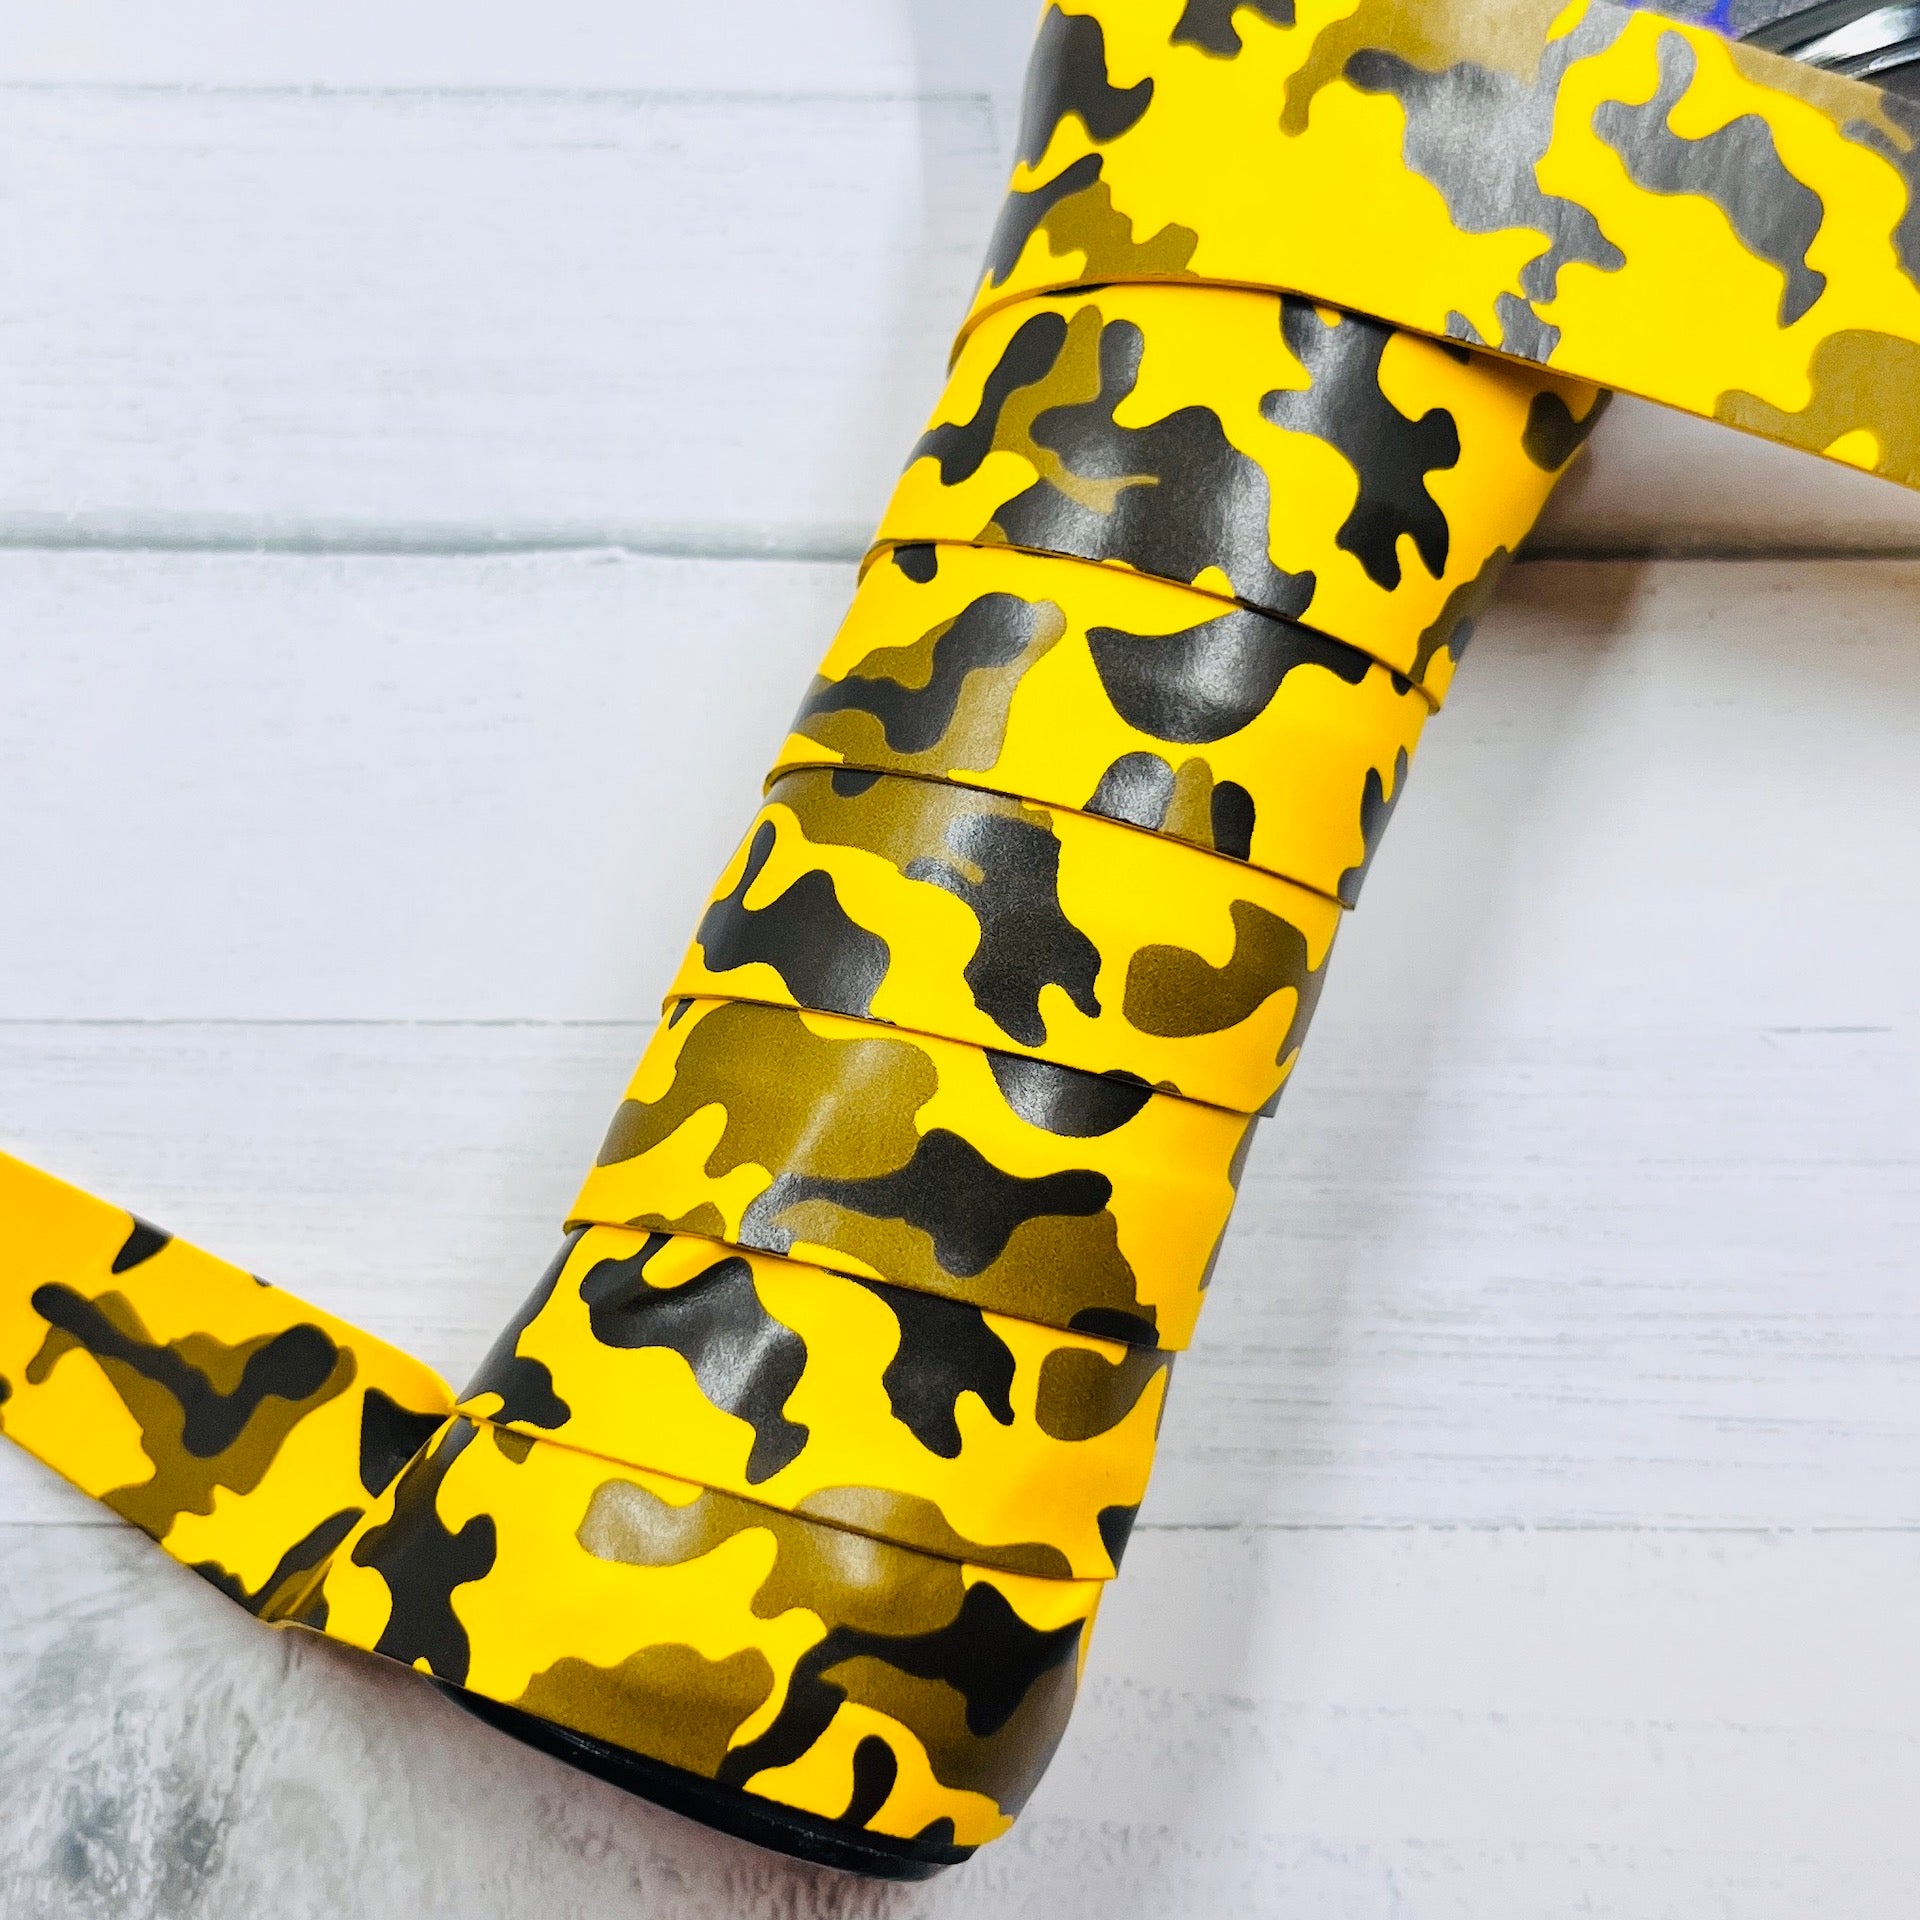 As all Pickleball players know, your grip will wear out long before your paddle does. Get some of these new colors and make sure you get the most from your paddle.  The new modern camo pattern is printed onto these grips. They will add a fun dimension to your paddle. It will also make it much easier to find your paddle in a stack of paddles, as almost no one will have this same pattern! 